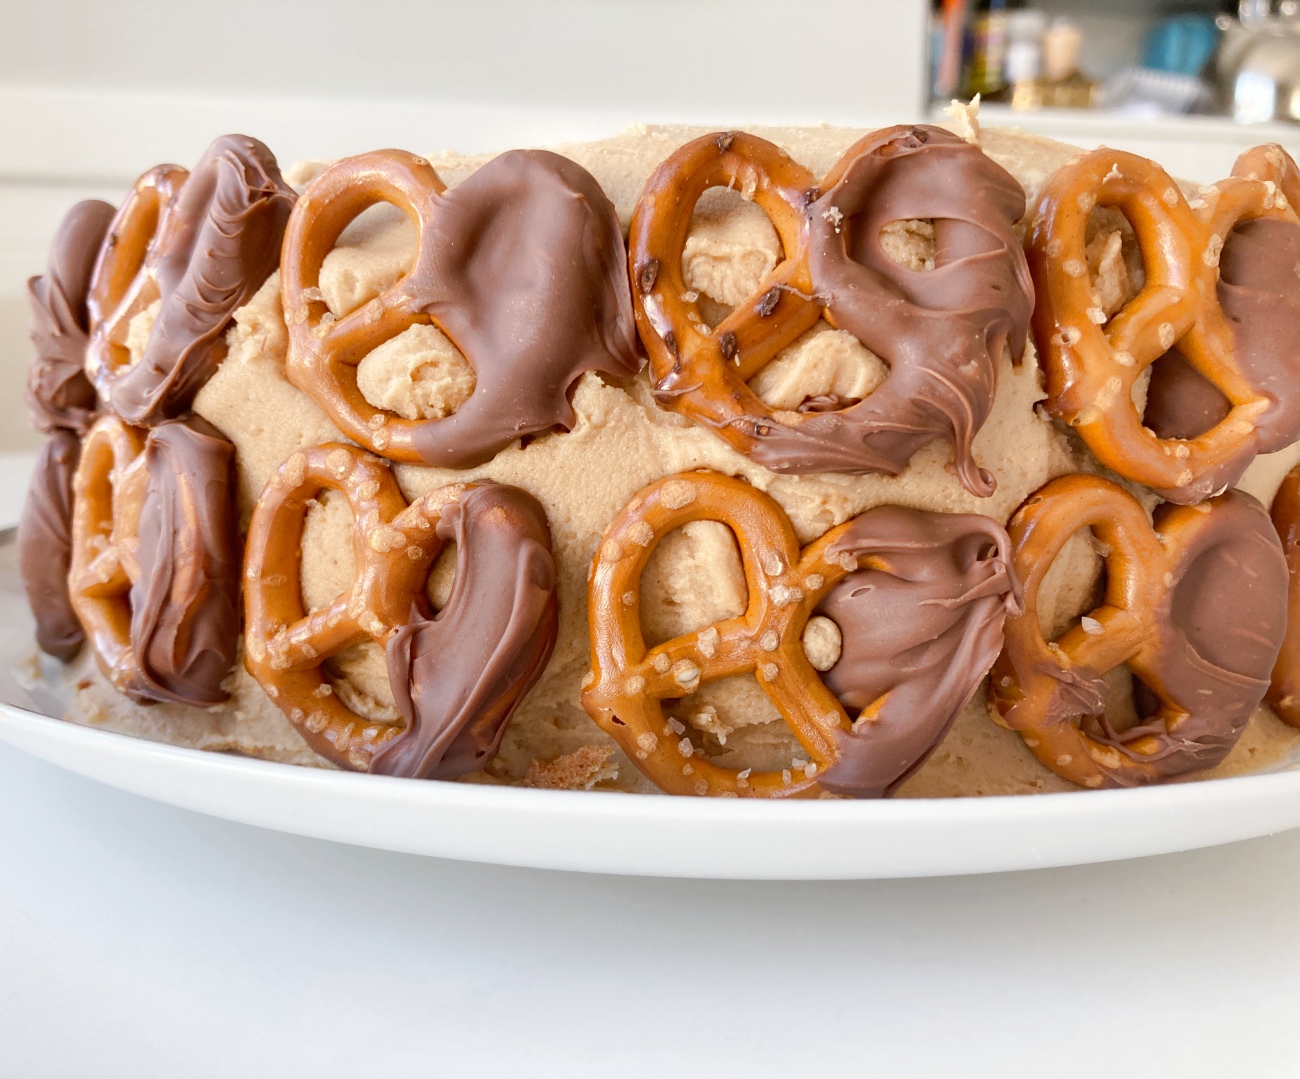 Decorate on the sides with pretzels and place a pile of peanuts in the center of the cake. Refrigerate until ready to cut into slices and serve.